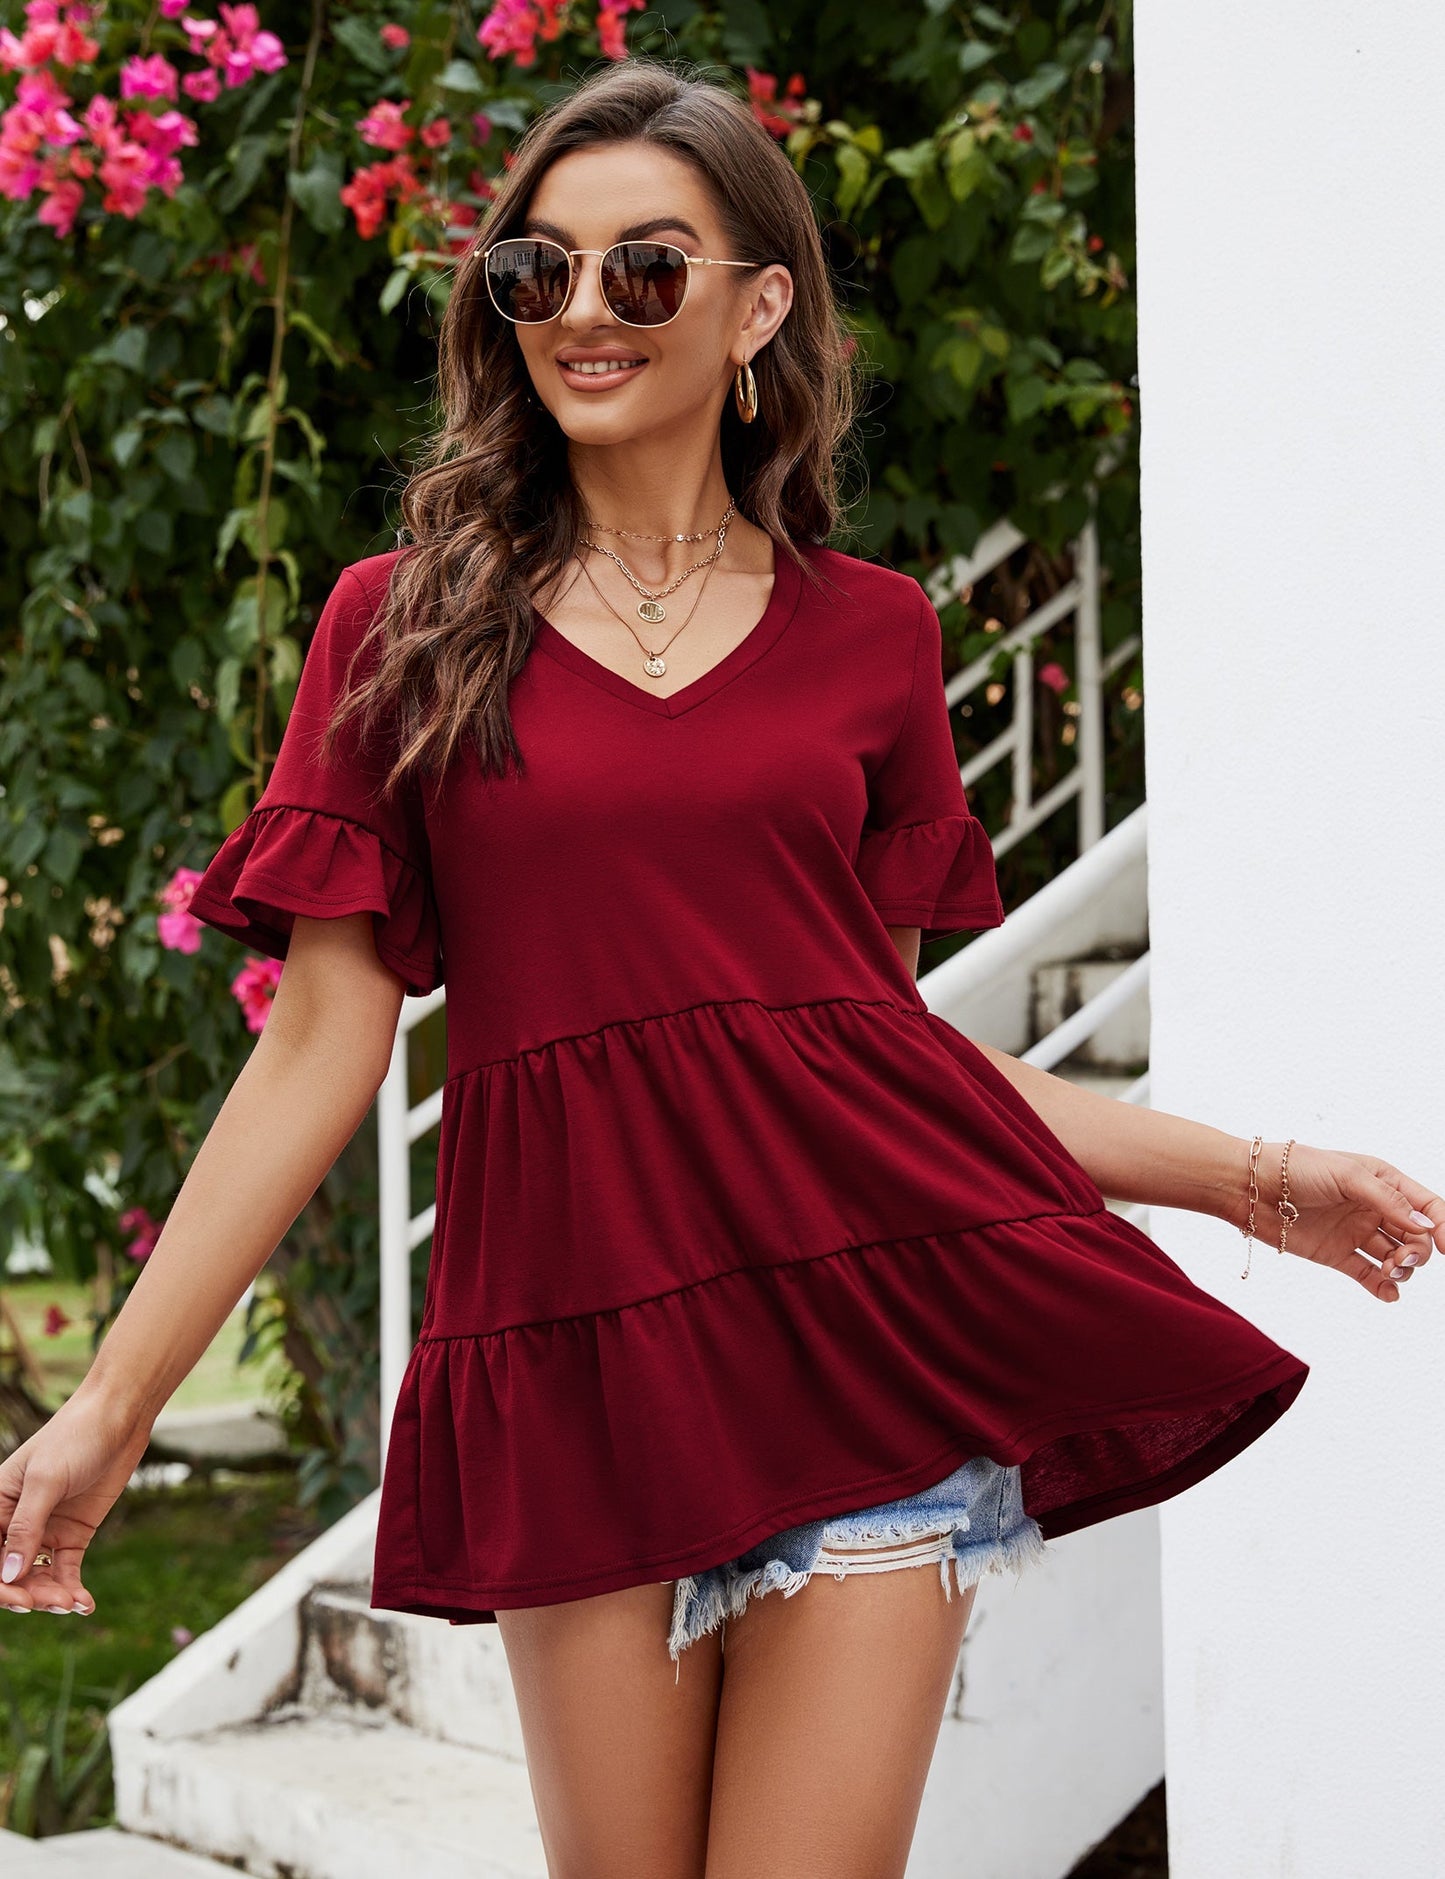 YESFASHION Peplum Tops for Women Summer Casual V Neck T Shirts Wine Red